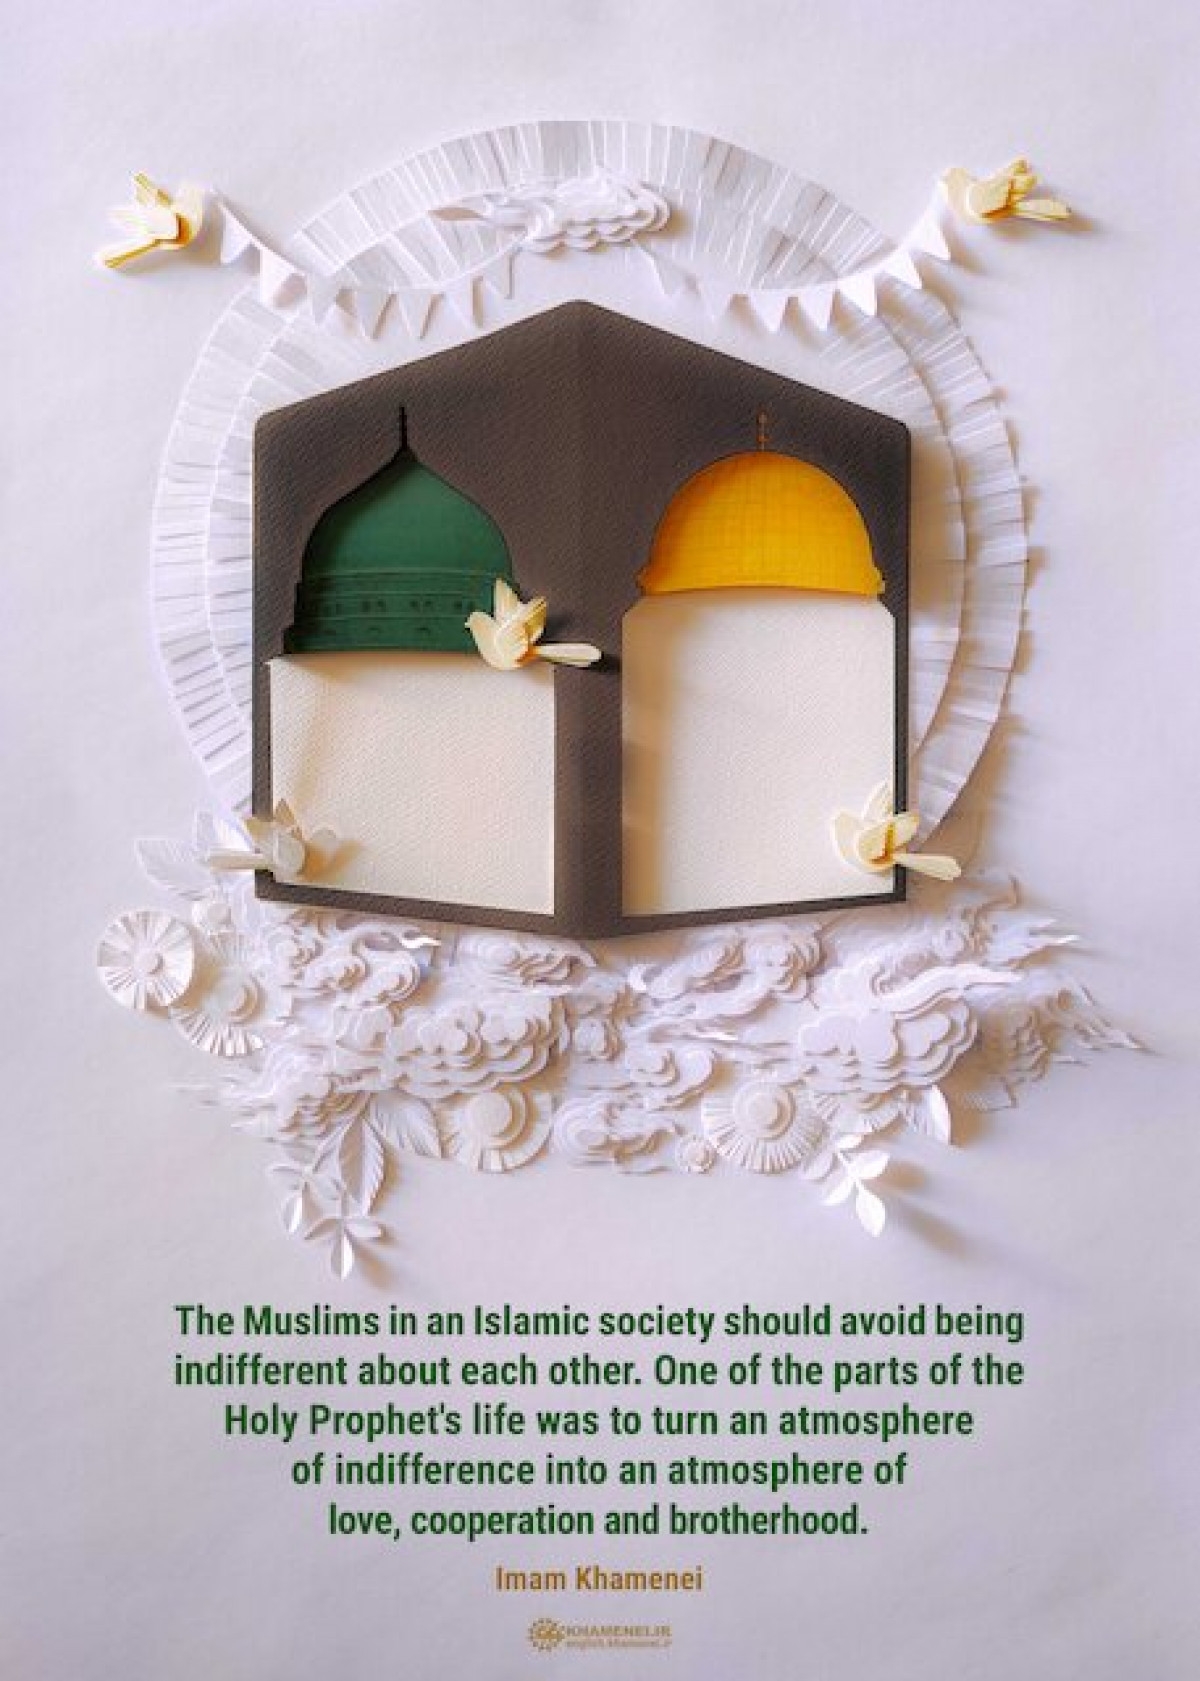 Muslims should avoid being indifferent about each other